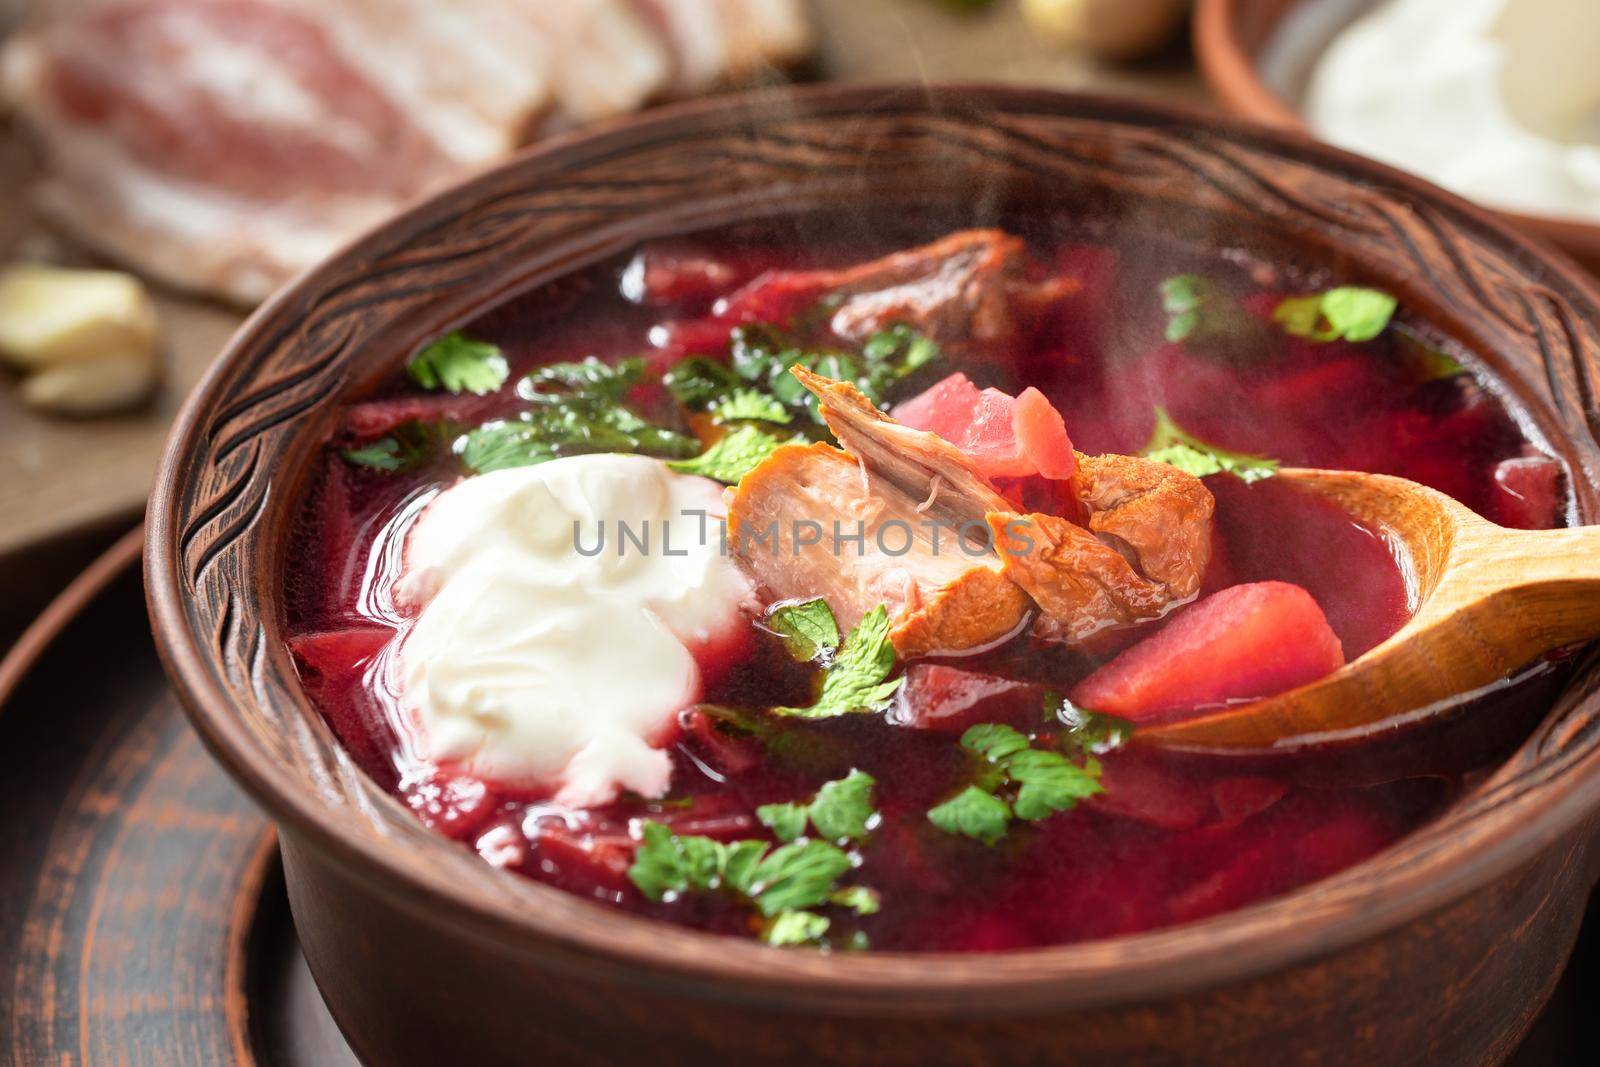 Freshly cooked borscht - traditional dish of Russian and Ukrainian cuisine in earthenware dishes with bacon, bread, sour cream and garlic, close up.